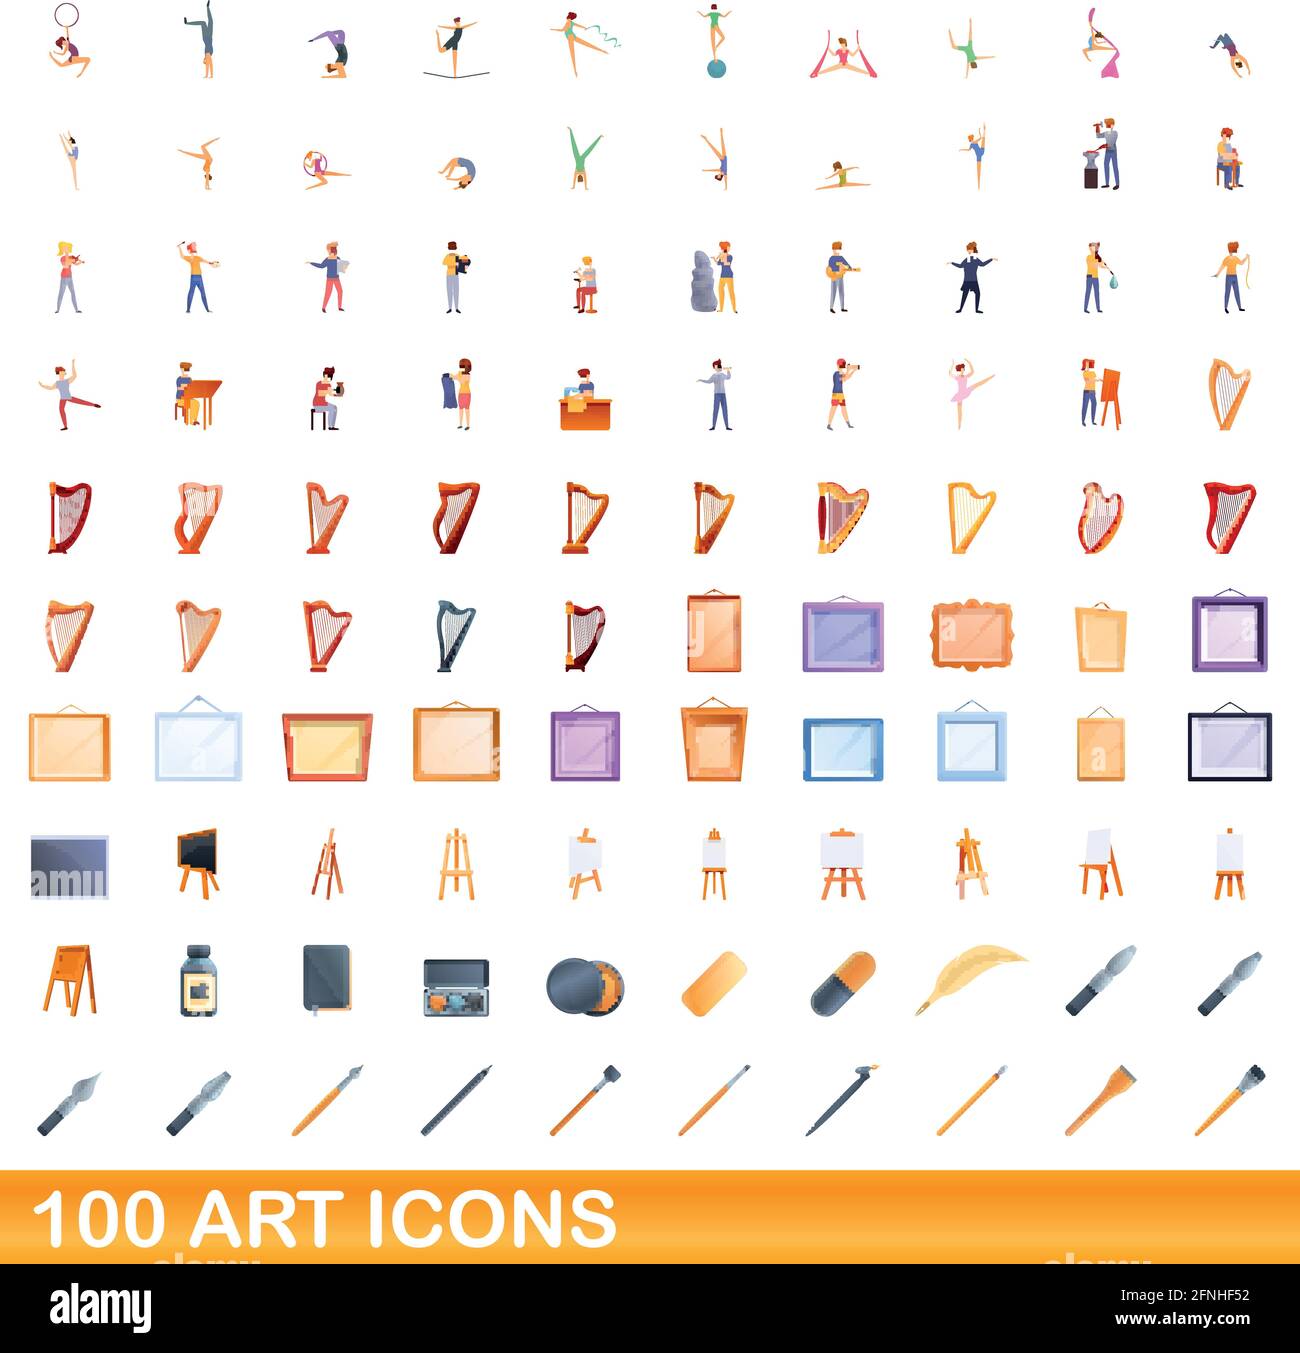 100 art icons set. Cartoon illustration of 100 art icons vector set isolated on white background Stock Vector